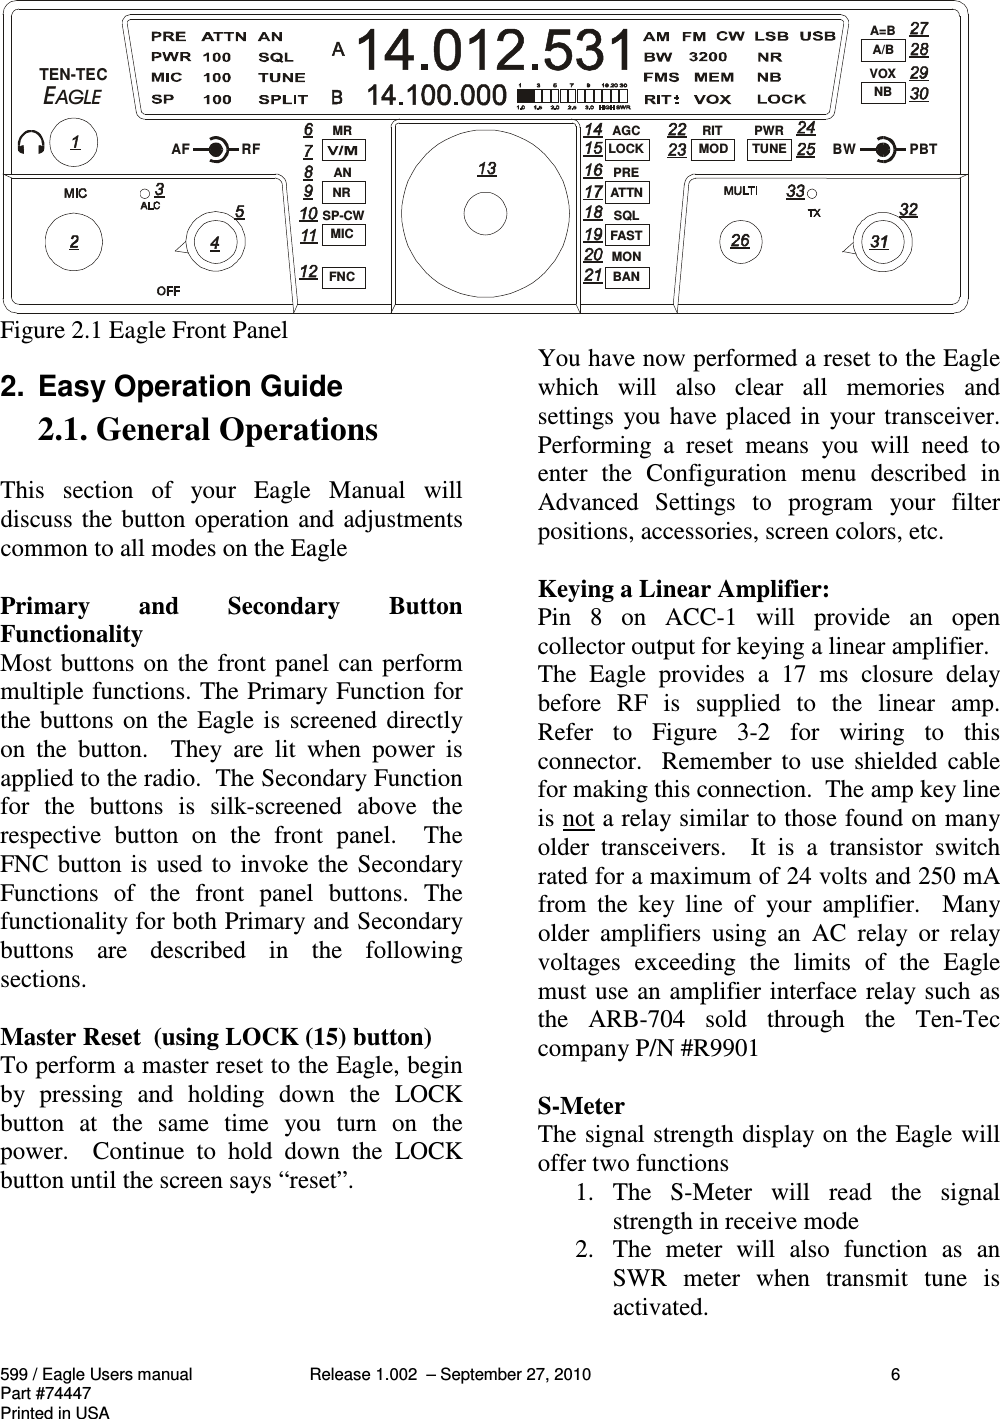 599 / Eagle Users manual Release 1.002  – September 27, 2010 6Part #74447Printed in USAFigure 2.1 Eagle Front Panel2.  Easy Operation Guide2.1. General OperationsThis  section  of  your  Eagle  Manual  willdiscuss the button operation and adjustmentscommon to all modes on the EaglePrimary  and  Secondary  ButtonFunctionalityMost buttons on the front panel can performmultiple functions. The Primary Function forthe buttons on the Eagle is screened directlyon  the  button.    They  are  lit  when  power  isapplied to the radio.  The Secondary Functionfor  the  buttons  is  silk-screened  above  therespective  button  on  the  front  panel.    TheFNC button is used to invoke the SecondaryFunctions  of  the  front  panel  buttons.  Thefunctionality for both Primary and Secondarybuttons  are  described  in  the  followingsections.Master Reset  (using LOCK (15) button)To perform a master reset to the Eagle, beginby  pressing  and  holding  down  the  LOCKbutton  at  the  same  time  you  turn  on  thepower.    Continue  to  hold  down  the  LOCKbutton until the screen says “reset”.You have now performed a reset to the Eaglewhich  will  also  clear  all  memories  andsettings you have placed in  your transceiver.Performing  a  reset  means  you  will  need  toenter  the  Configuration  menu  described  inAdvanced  Settings  to  program  your  filterpositions, accessories, screen colors, etc.Keying a Linear Amplifier:Pin  8  on  ACC-1  will  provide  an  opencollector output for keying a linear amplifier.The  Eagle  provides  a  17  ms  closure  delaybefore  RF  is  supplied  to  the  linear  amp.Refer  to  Figure  3-2  for  wiring  to  thisconnector.  Remember  to  use  shielded  cablefor making this connection.  The amp key lineis not a relay similar to those found on manyolder  transceivers.    It  is  a  transistor  switchrated for a maximum of 24 volts and 250 mAfrom  the  key  line  of  your  amplifier.    Manyolder  amplifiers  using  an  AC  relay  or  relayvoltages  exceeding  the  limits  of  the  Eaglemust use an amplifier interface relay such asthe  ARB-704  sold  through  the  Ten-Teccompany P/N #R9901S-MeterThe signal strength display on the Eagle willoffer two functions1. The  S-Meter  will  read  the  signalstrength in receive mode2. The  meter  will  also  function  as  anSWR  meter  when  transmit  tune  isactivated.  TEN-TECAF RFMRANSP-CWBWPBTA=BVOXPWRRITAGCPRESQLMON NRMICFNCLOCKATTNFASTBANMOD TUNEA/BNB